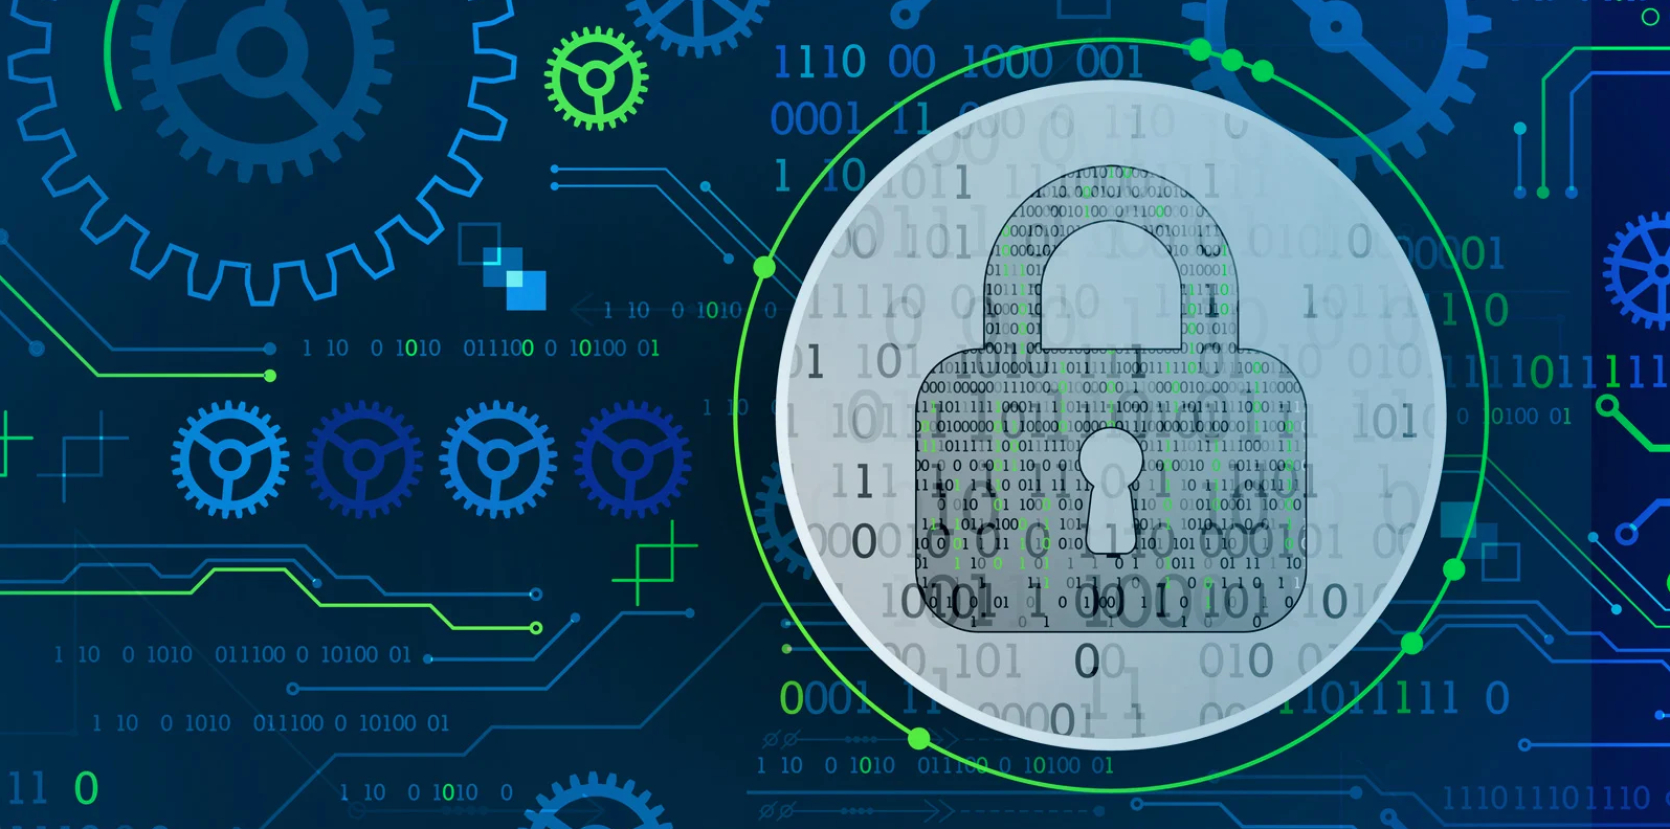 WHY IS OT CYBERSECURITY OVERLOOKED IN MANUFACTURING?